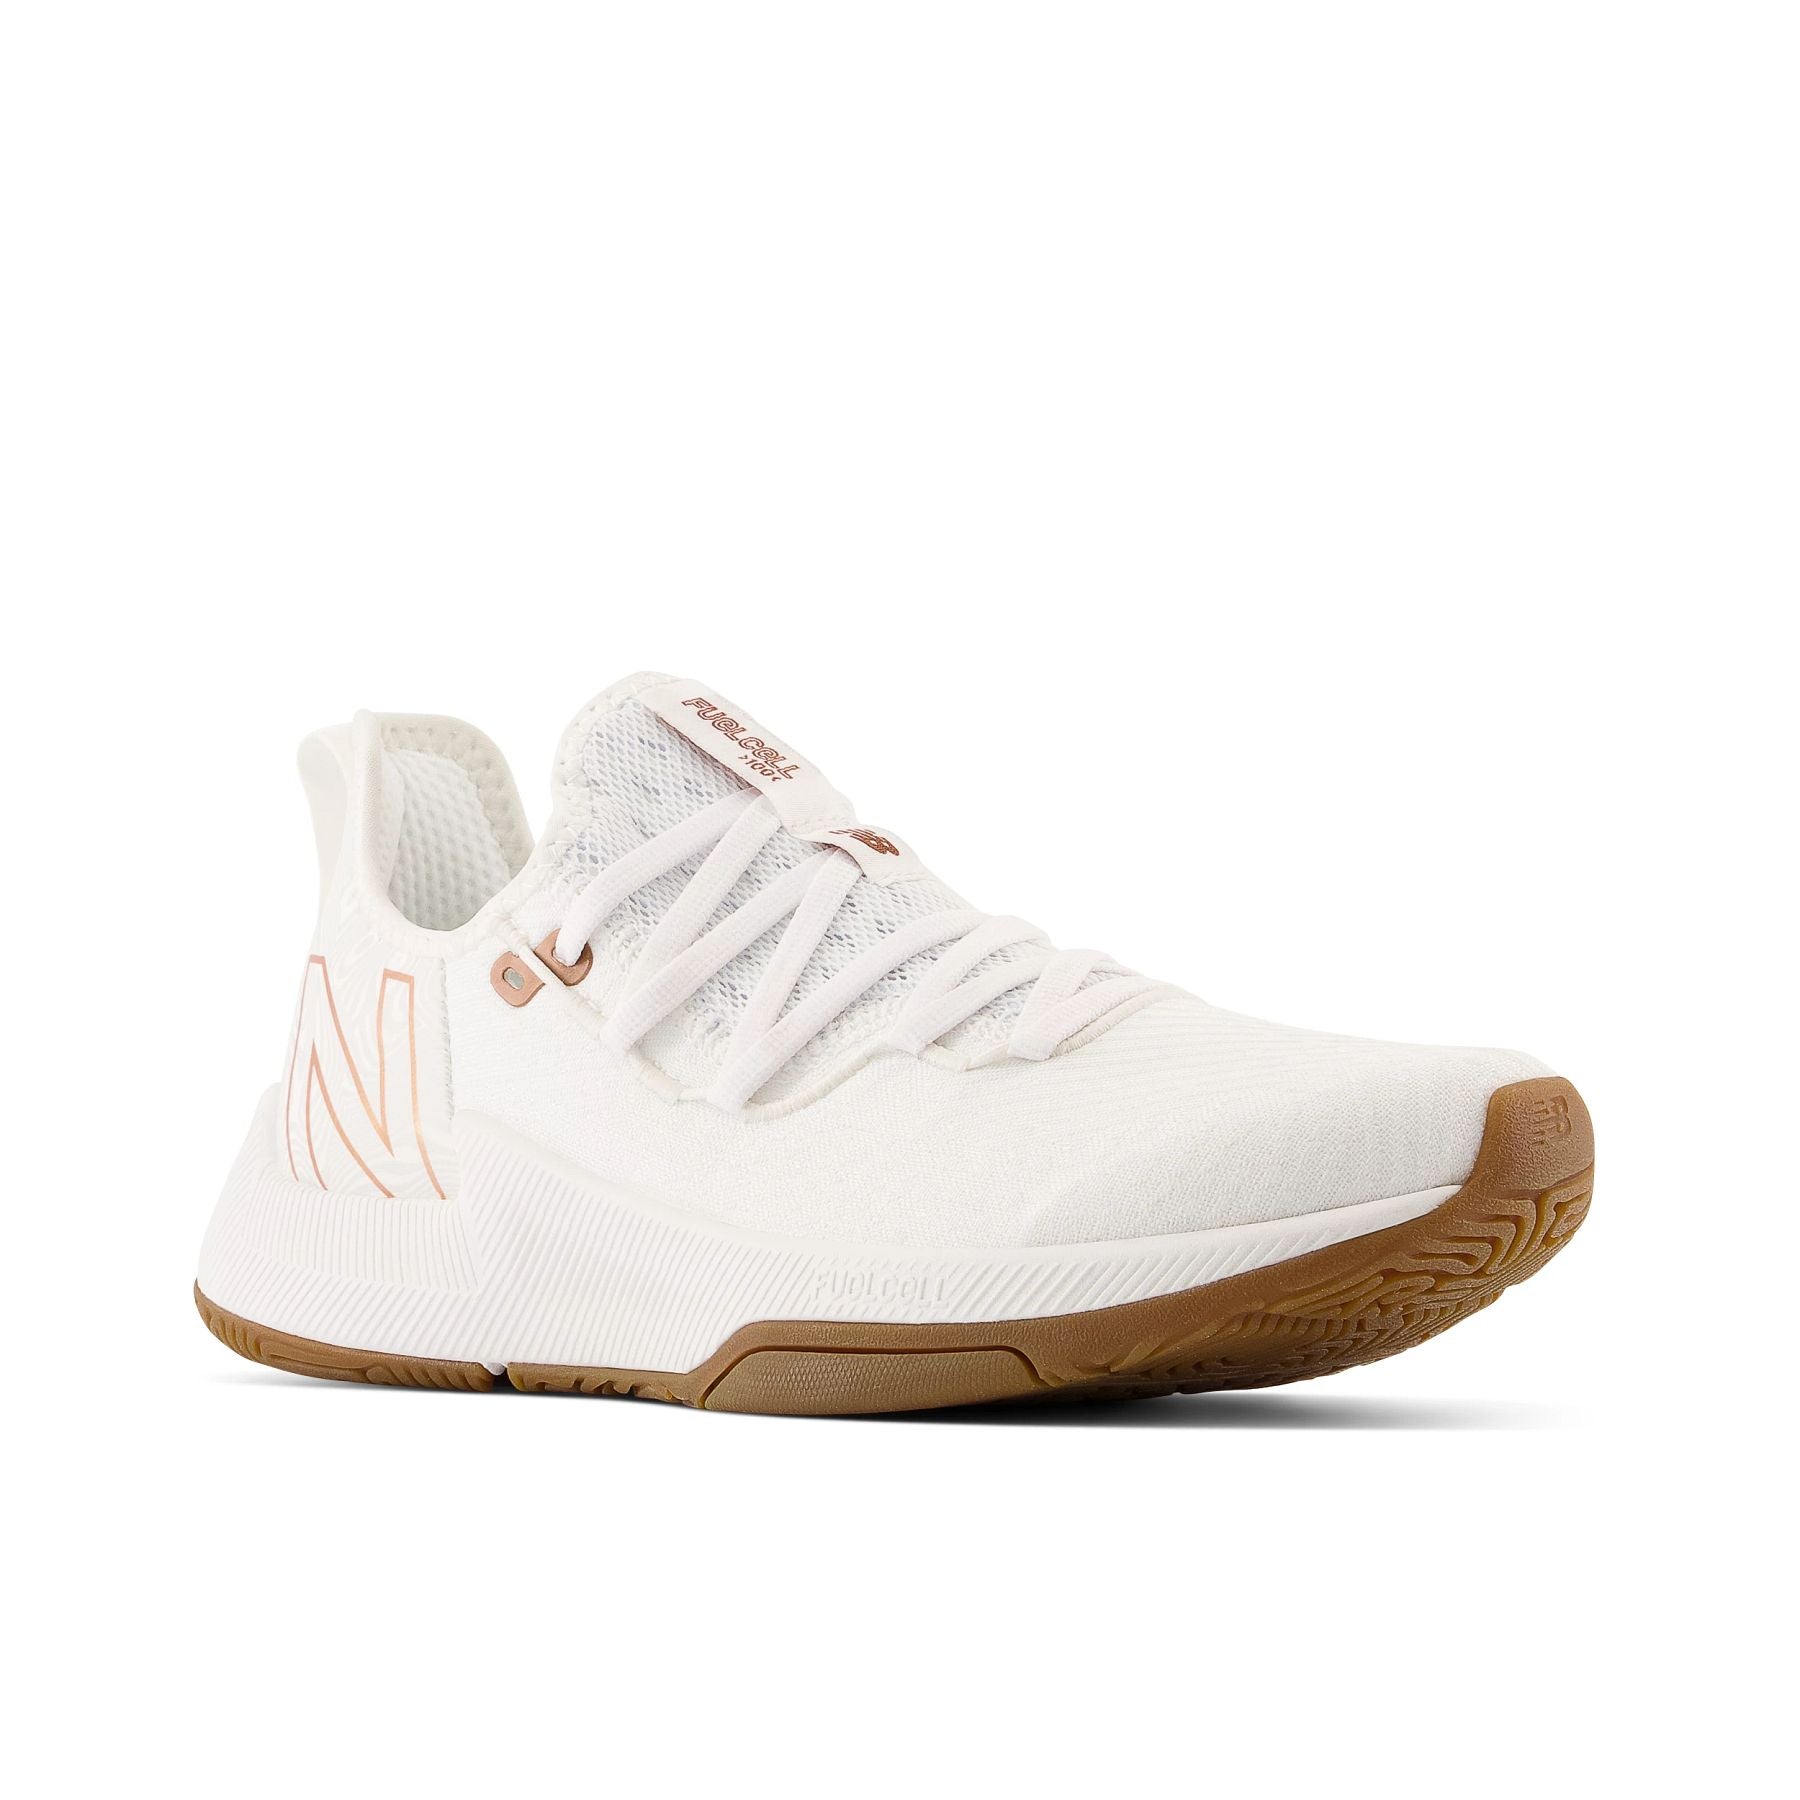 Front angle view of the Women's FuelCell 100 cross trainer by New Balance in the color White/White